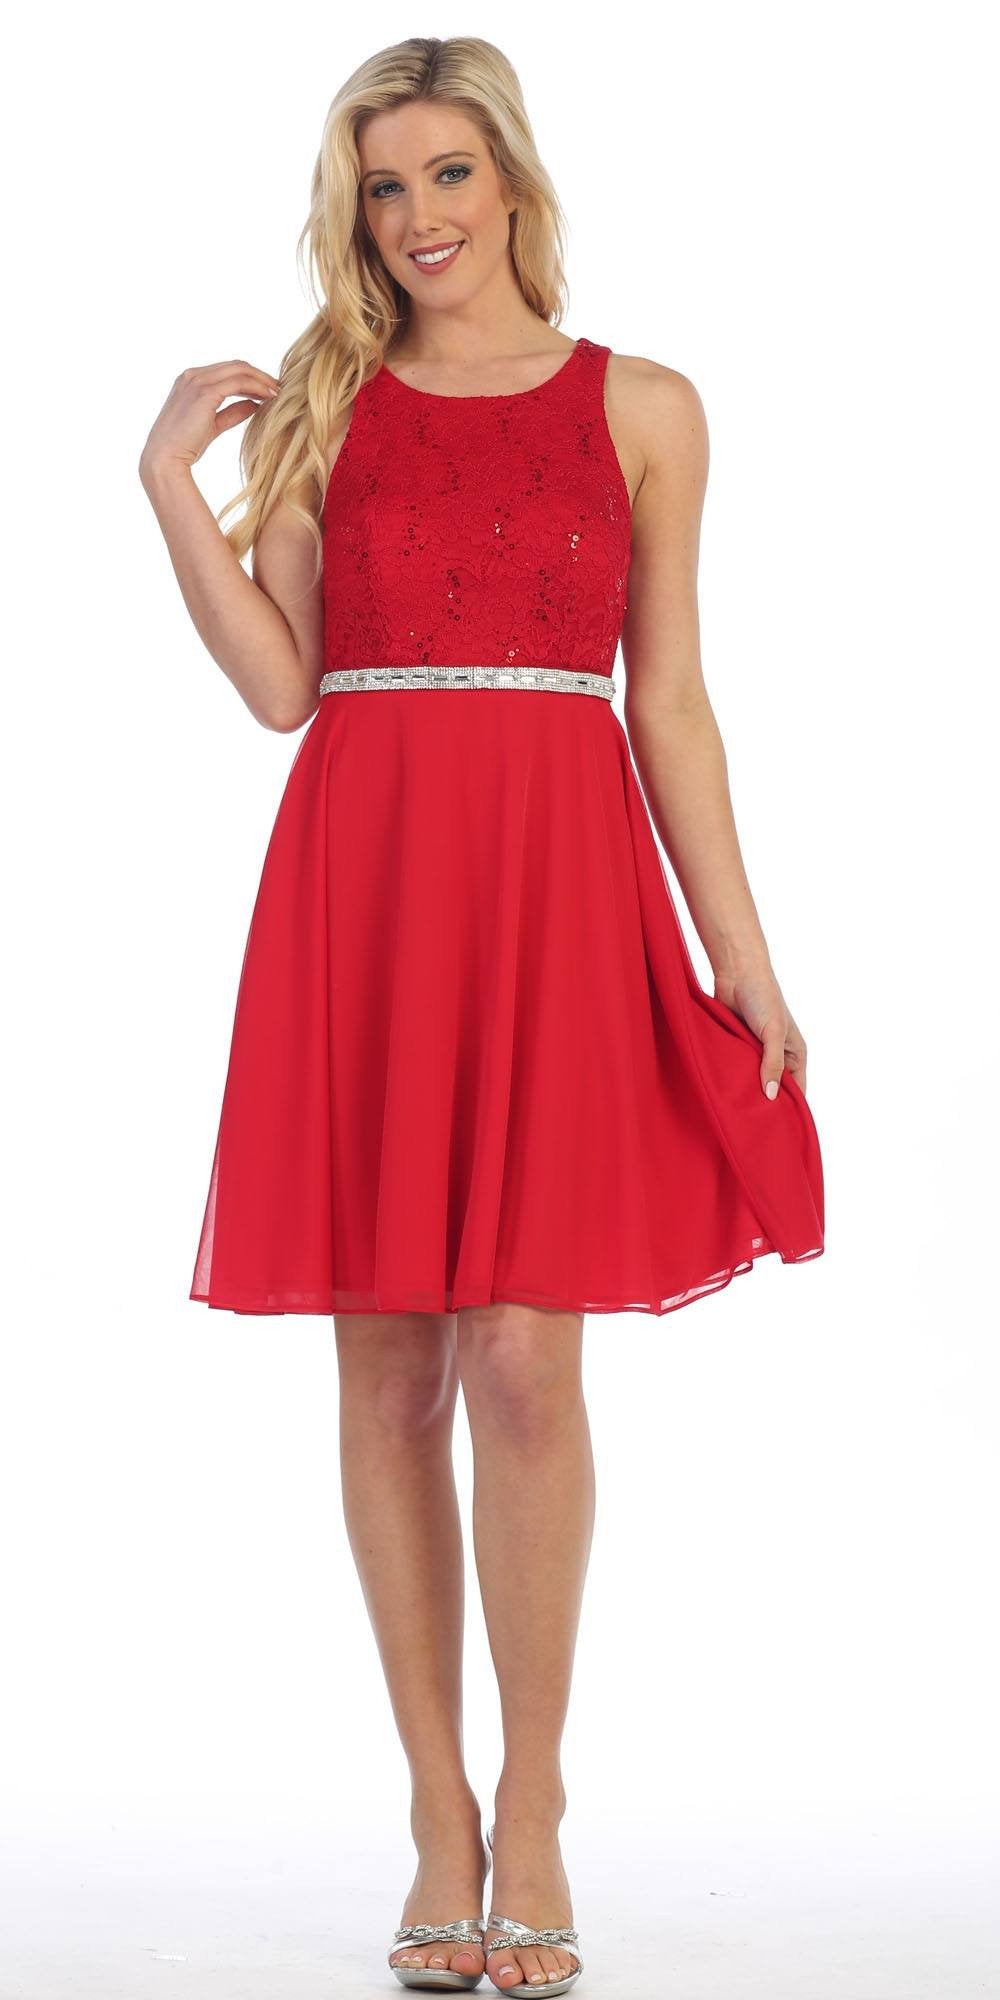 Celavie 6253 Scoop Neck Lace Top Knee-Length Cocktail Dress Red